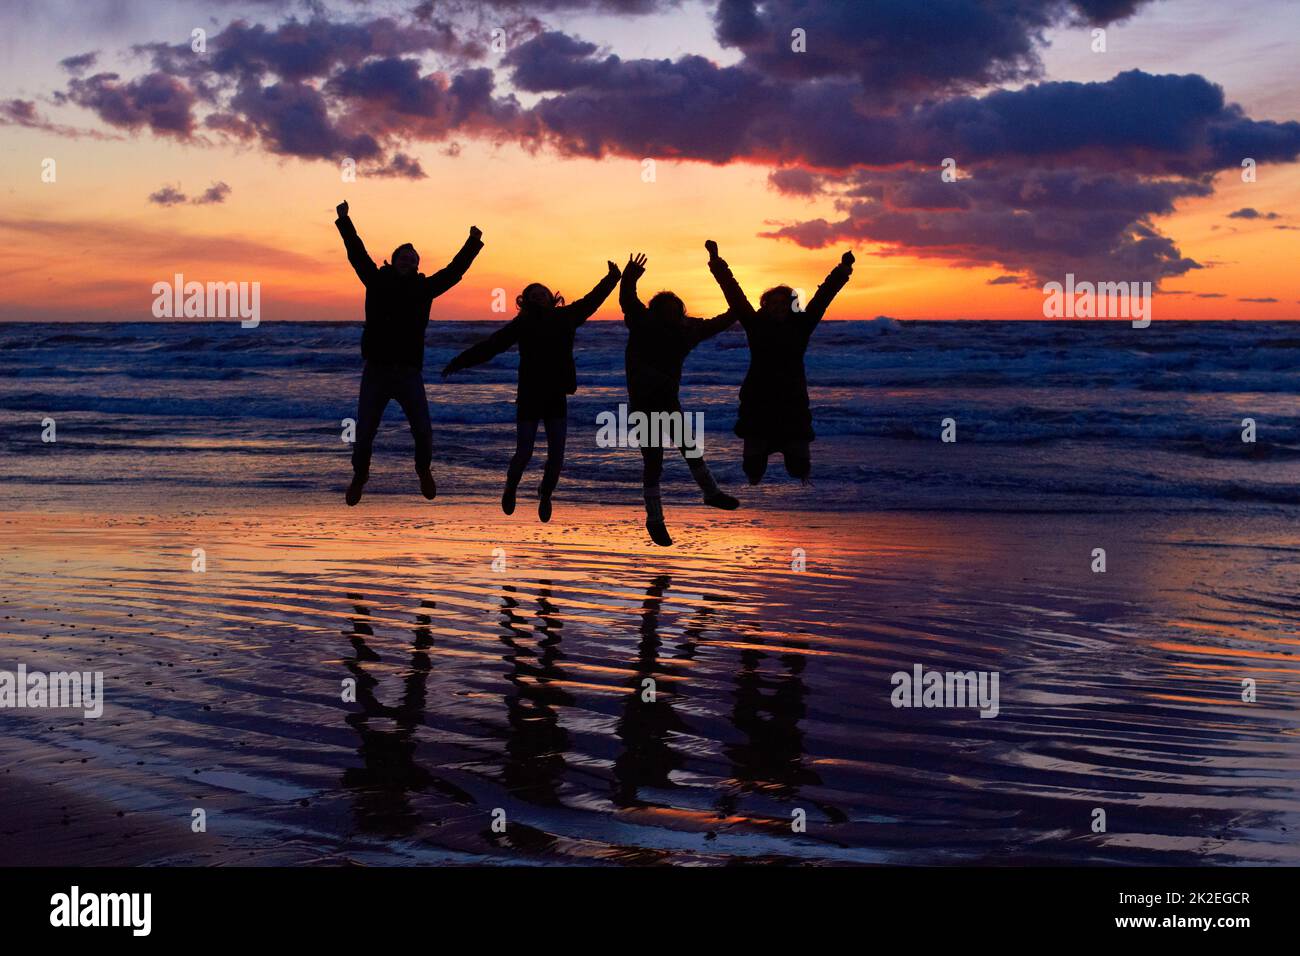 Loving the vitality of nature. Silhouette of a group of people jumping on the beach at sunset. Stock Photo